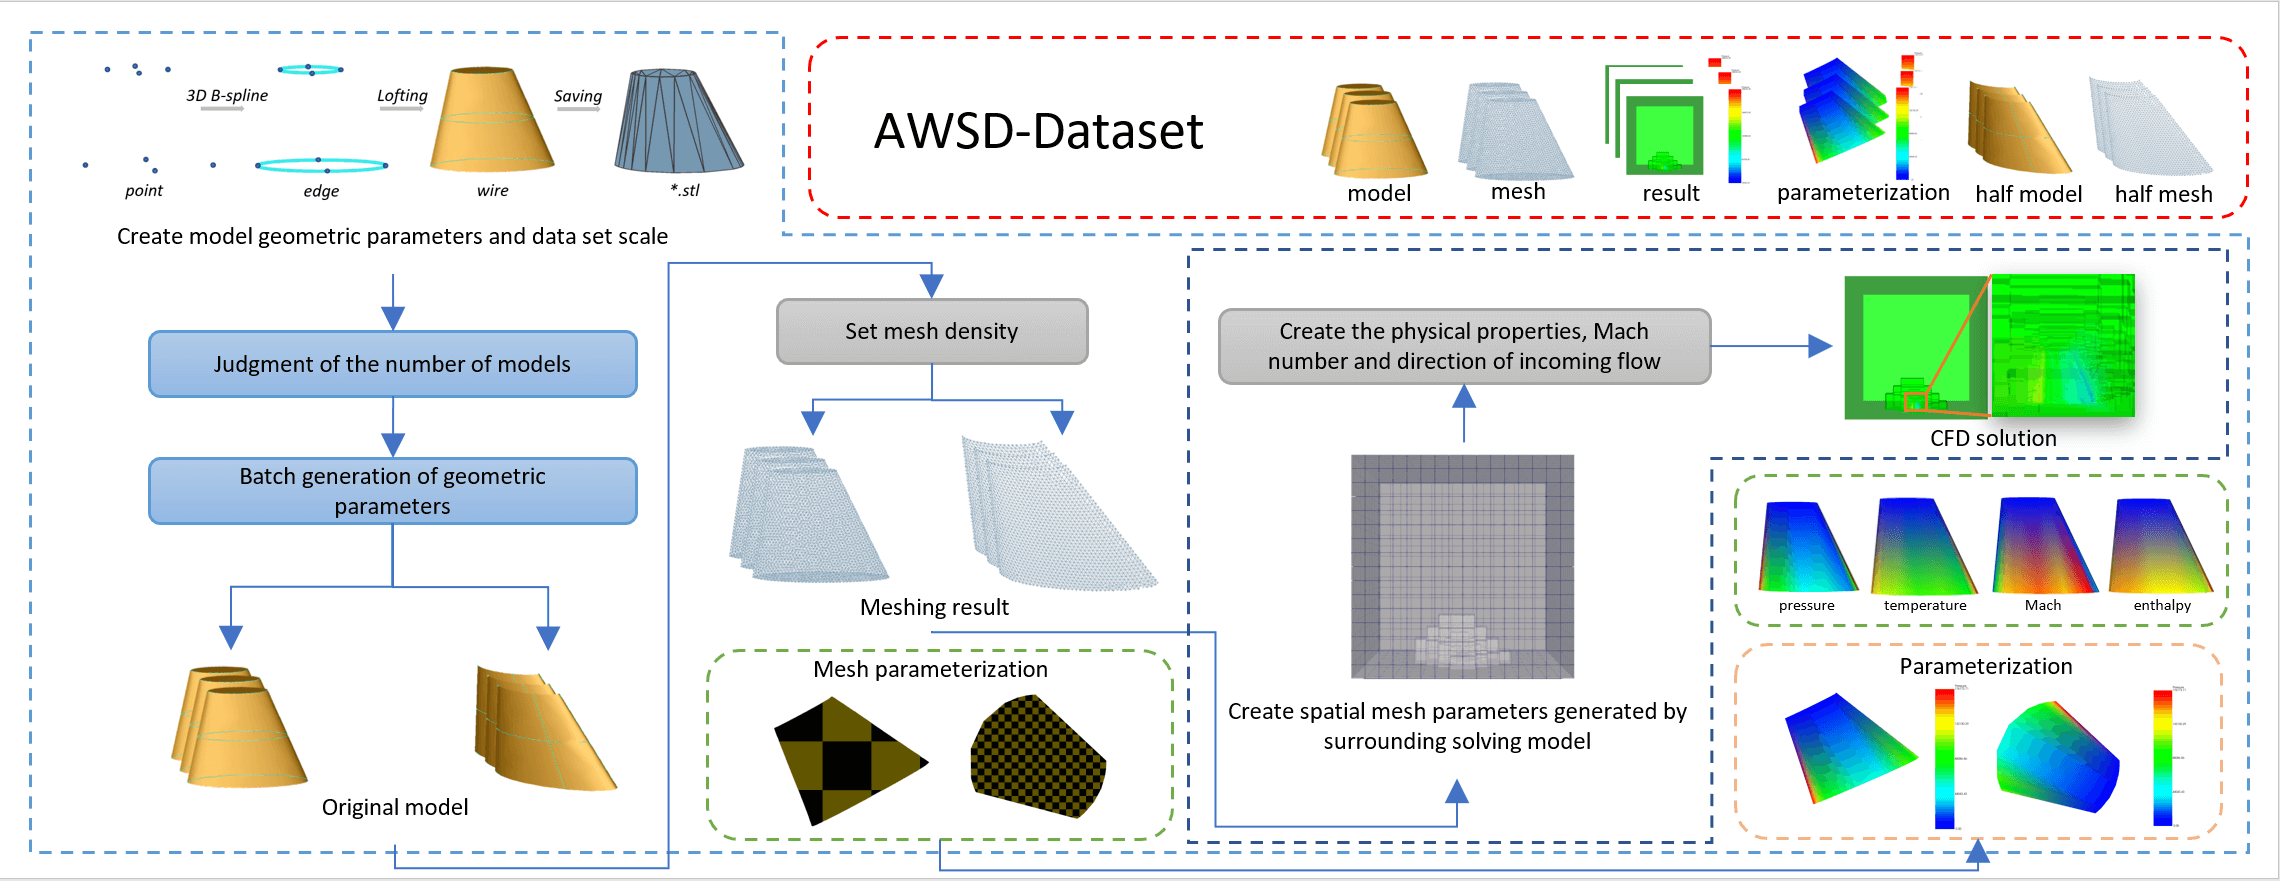 AWSD: An Aircraft Wing Dataset Created by an Automatic Workflow for Data Mining in Geometric Processing